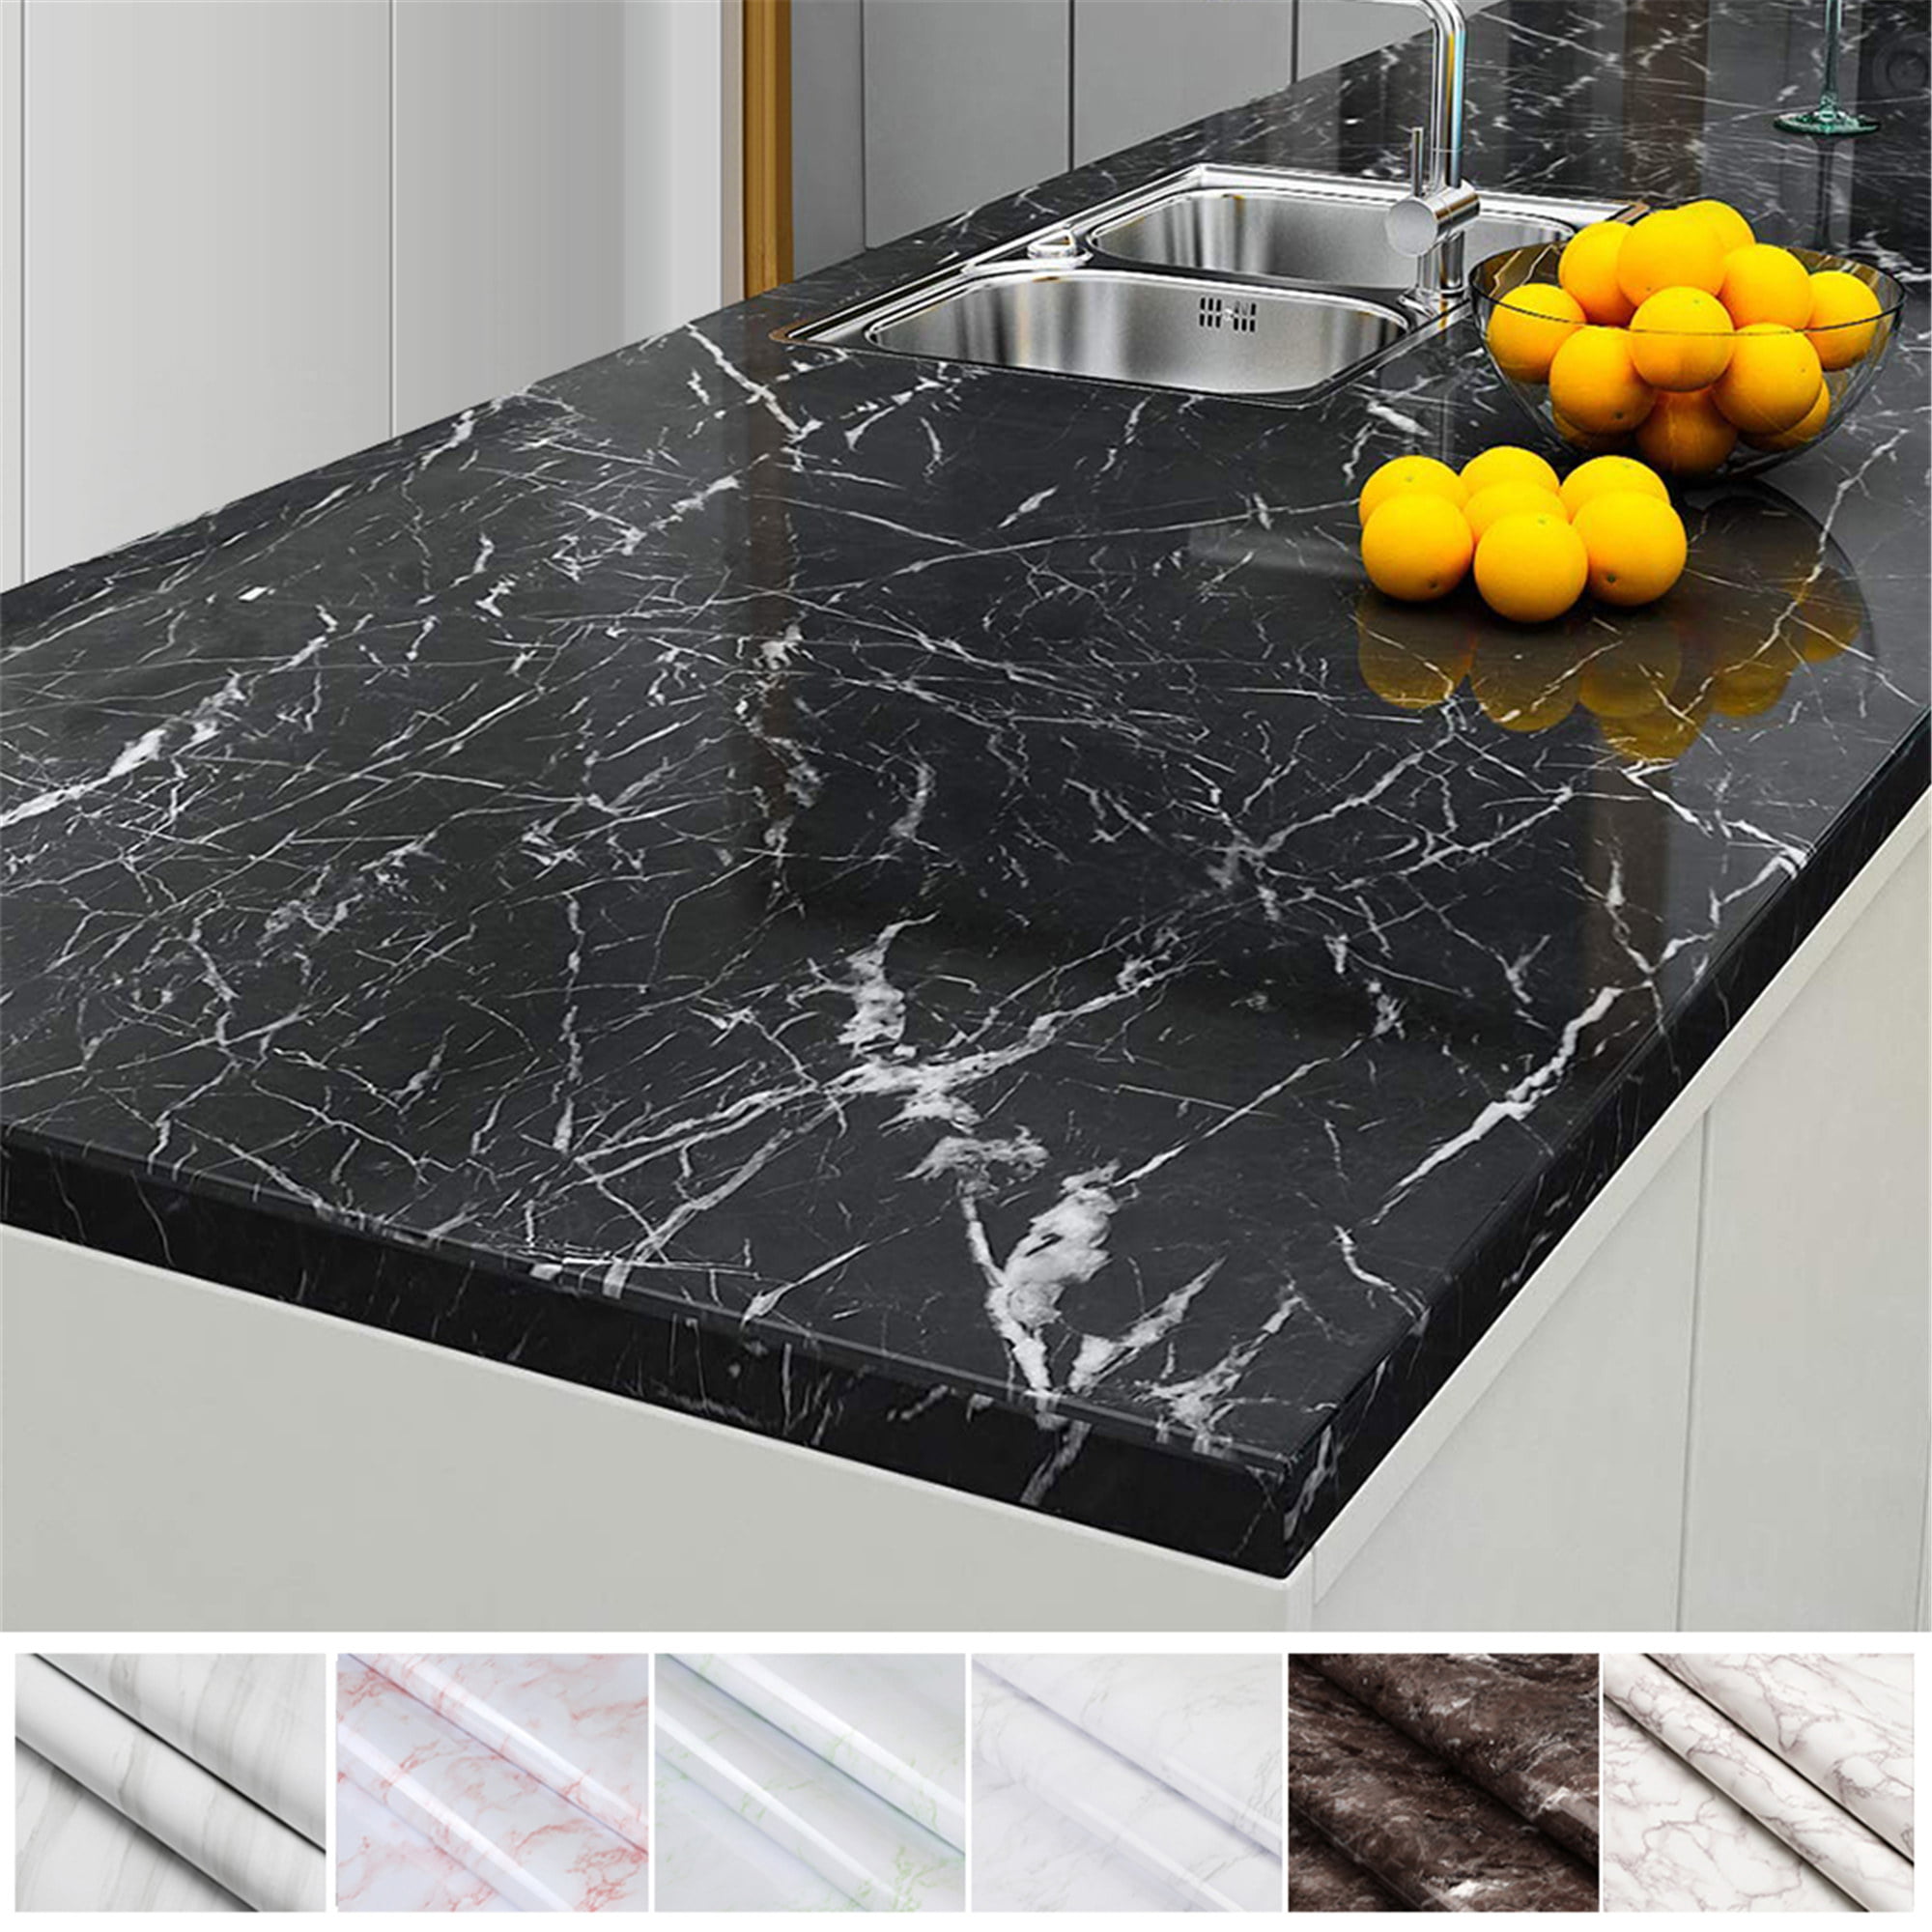 Marble Wallpaper Peel And Stick Kitchen Self Adhesive Removable Wall